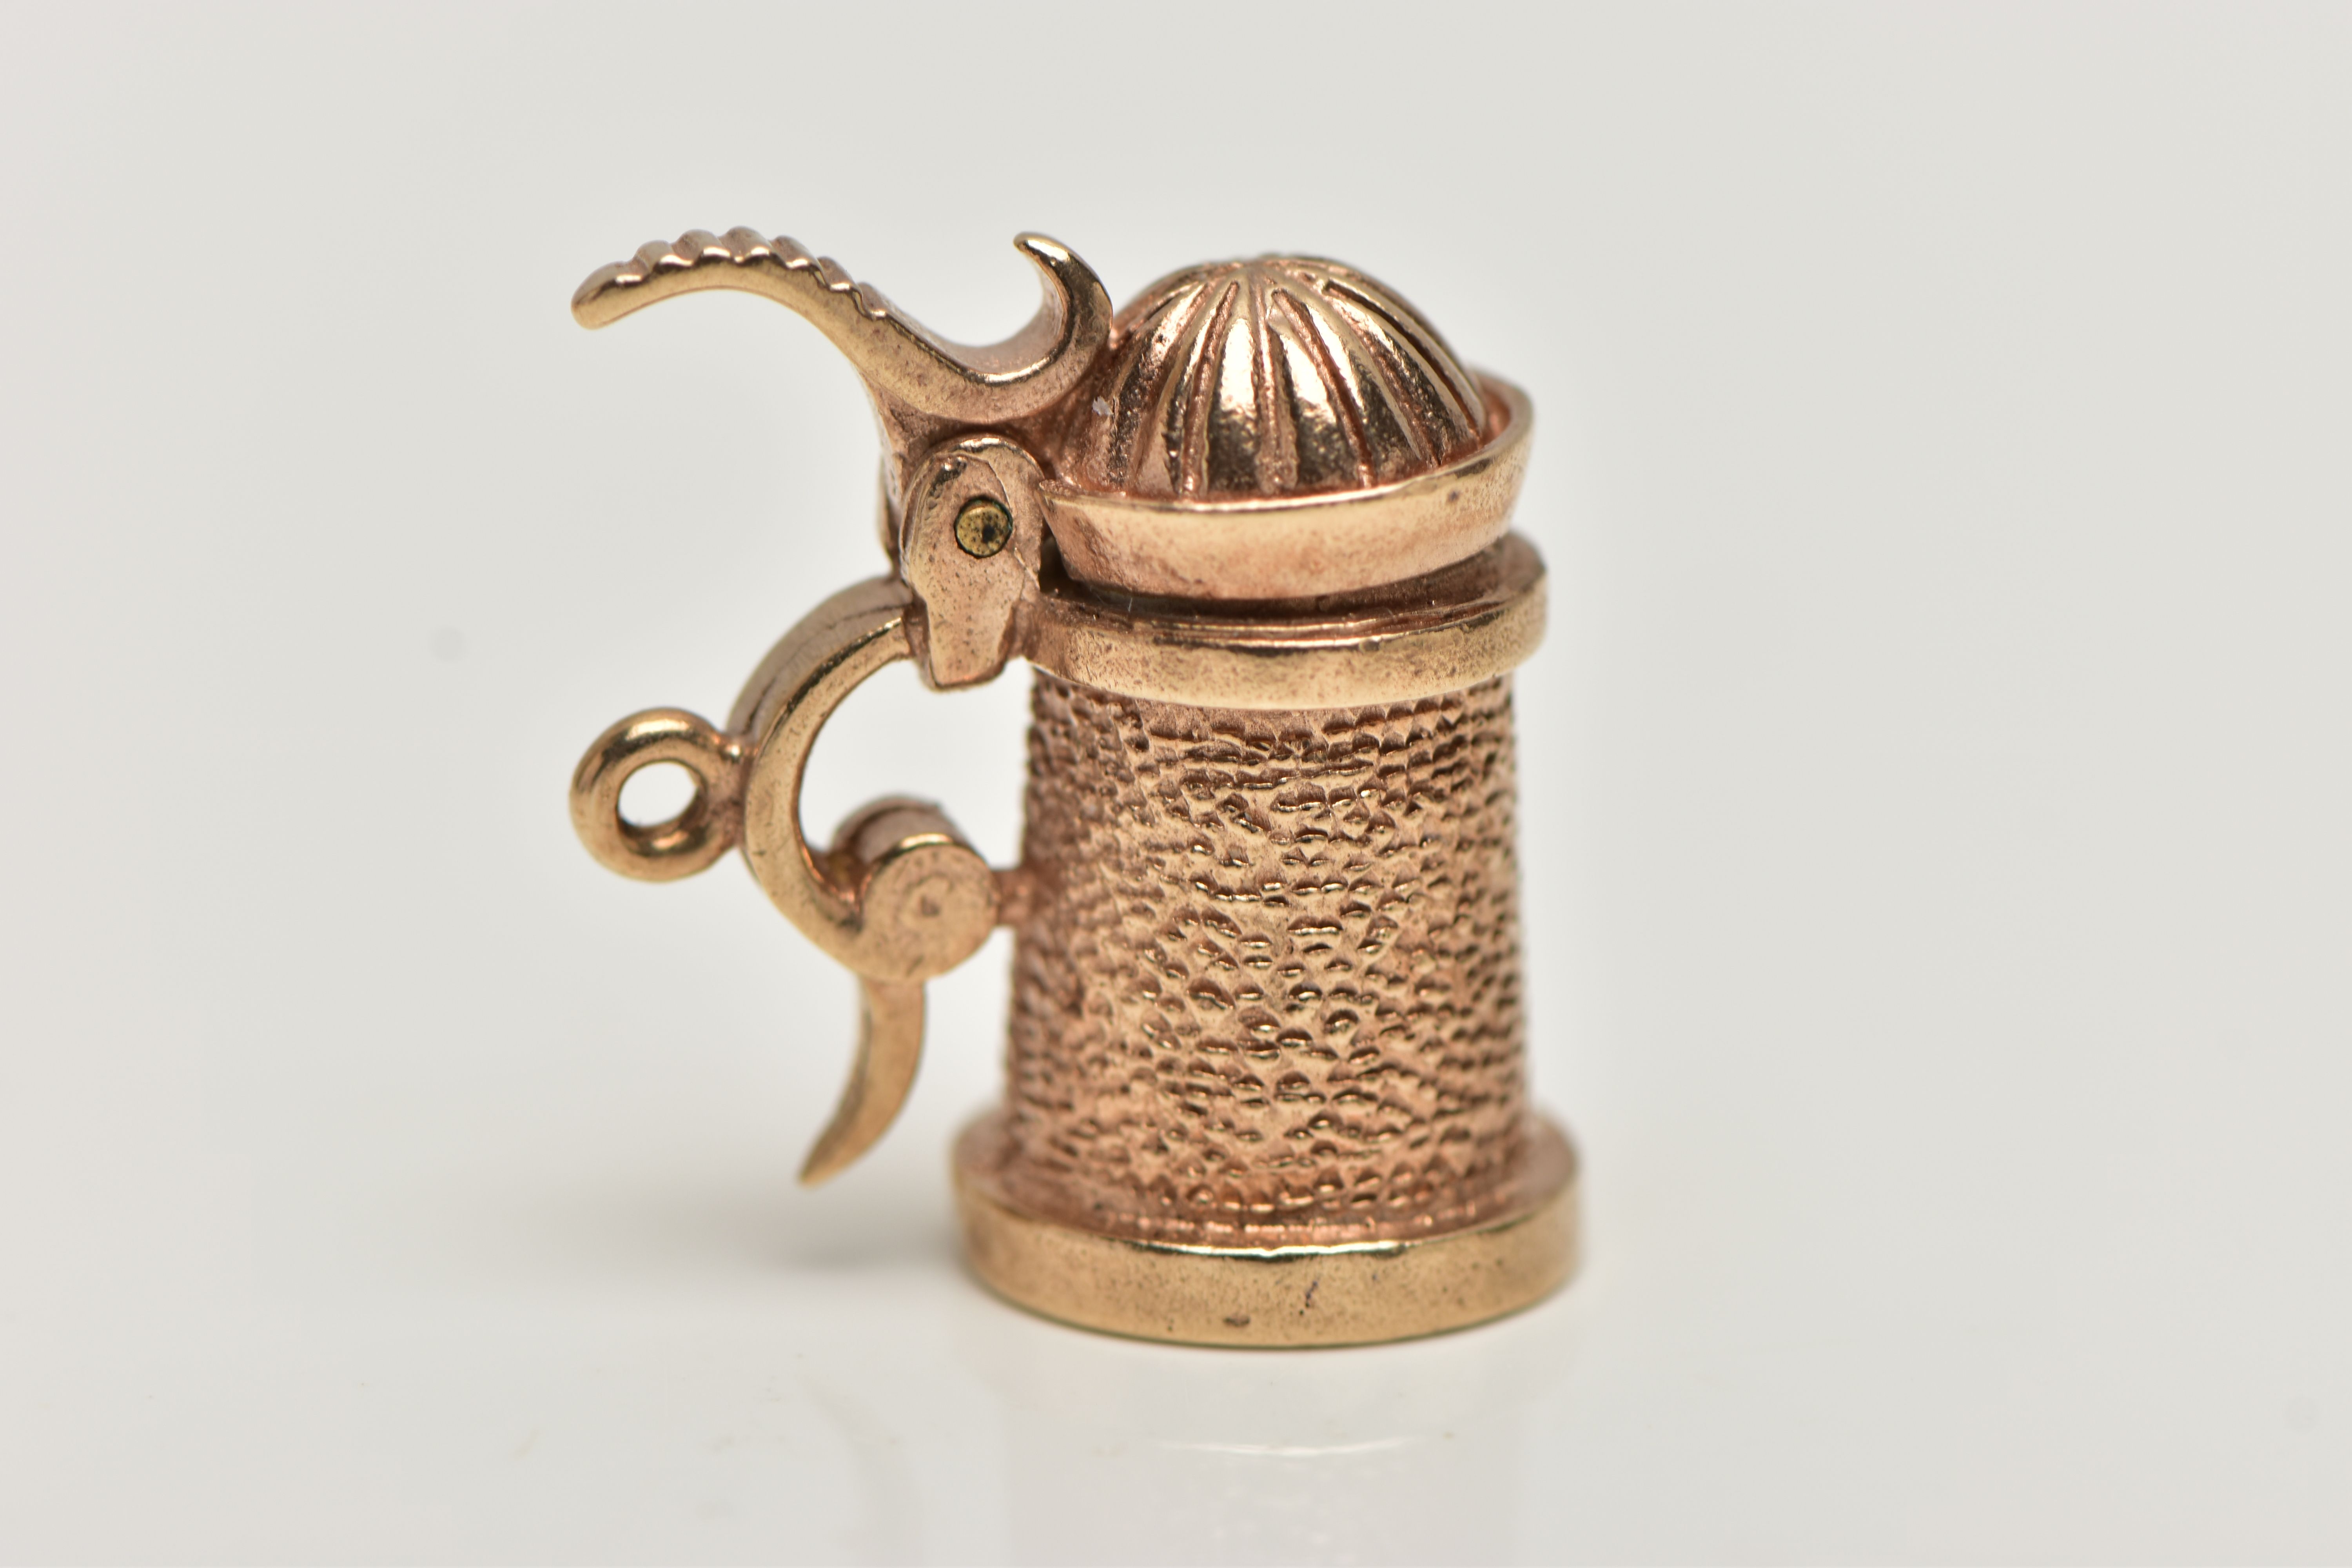 A 9CT GOLD CHARM, yellow gold charm of a tankard with an opening lid, hallmarked 9ct London, - Image 2 of 3